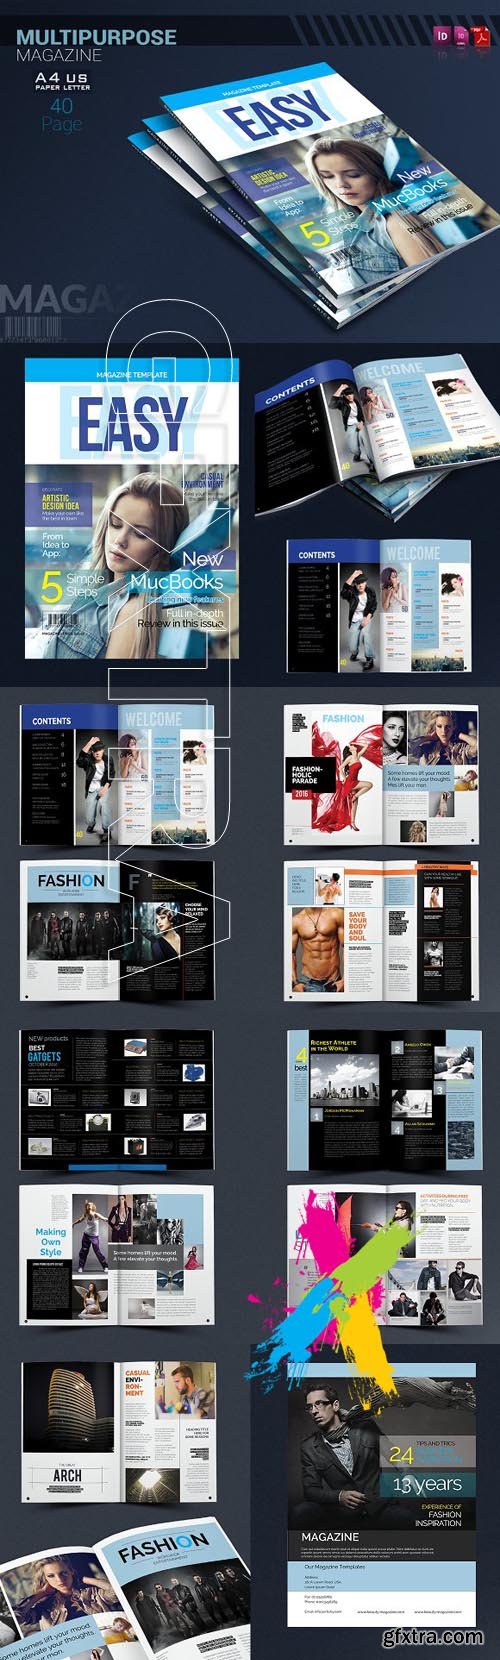 Clean & Simple Magazine Template 1221635